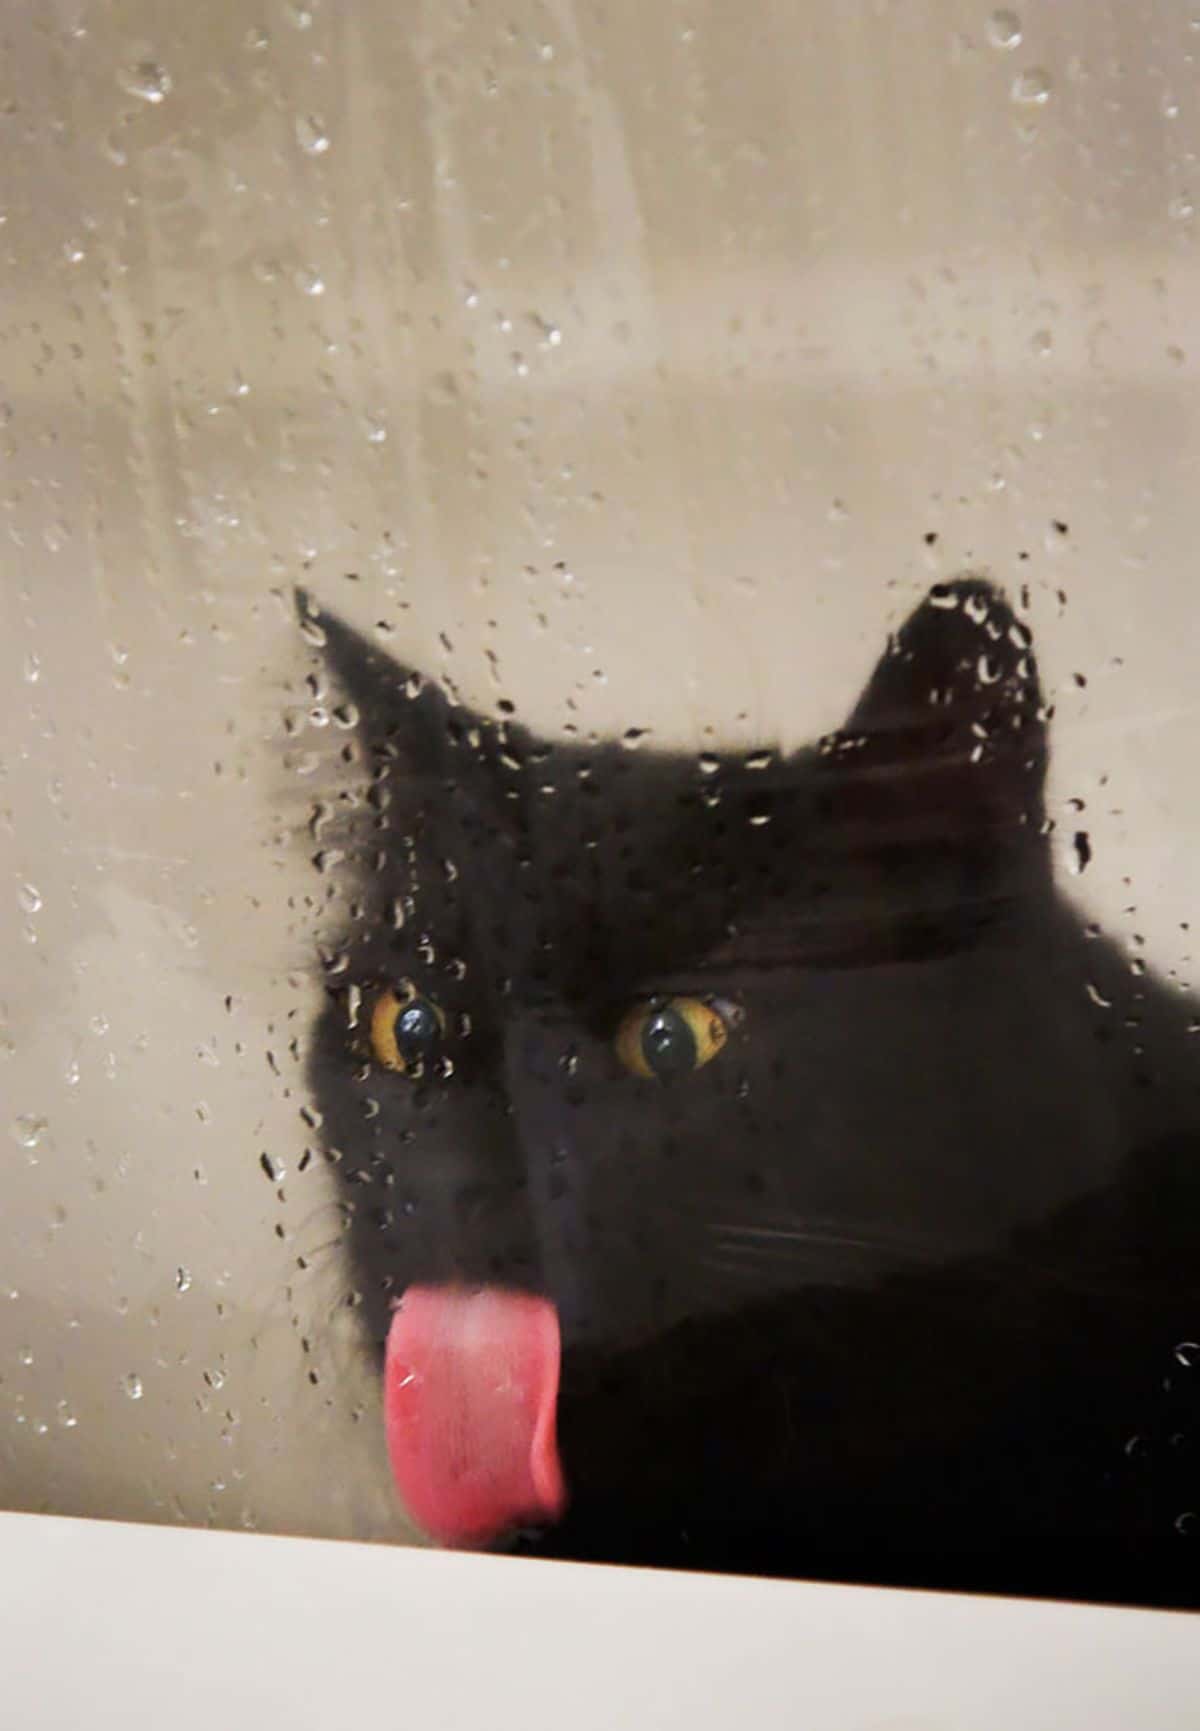 black cat licking a glass with water on it